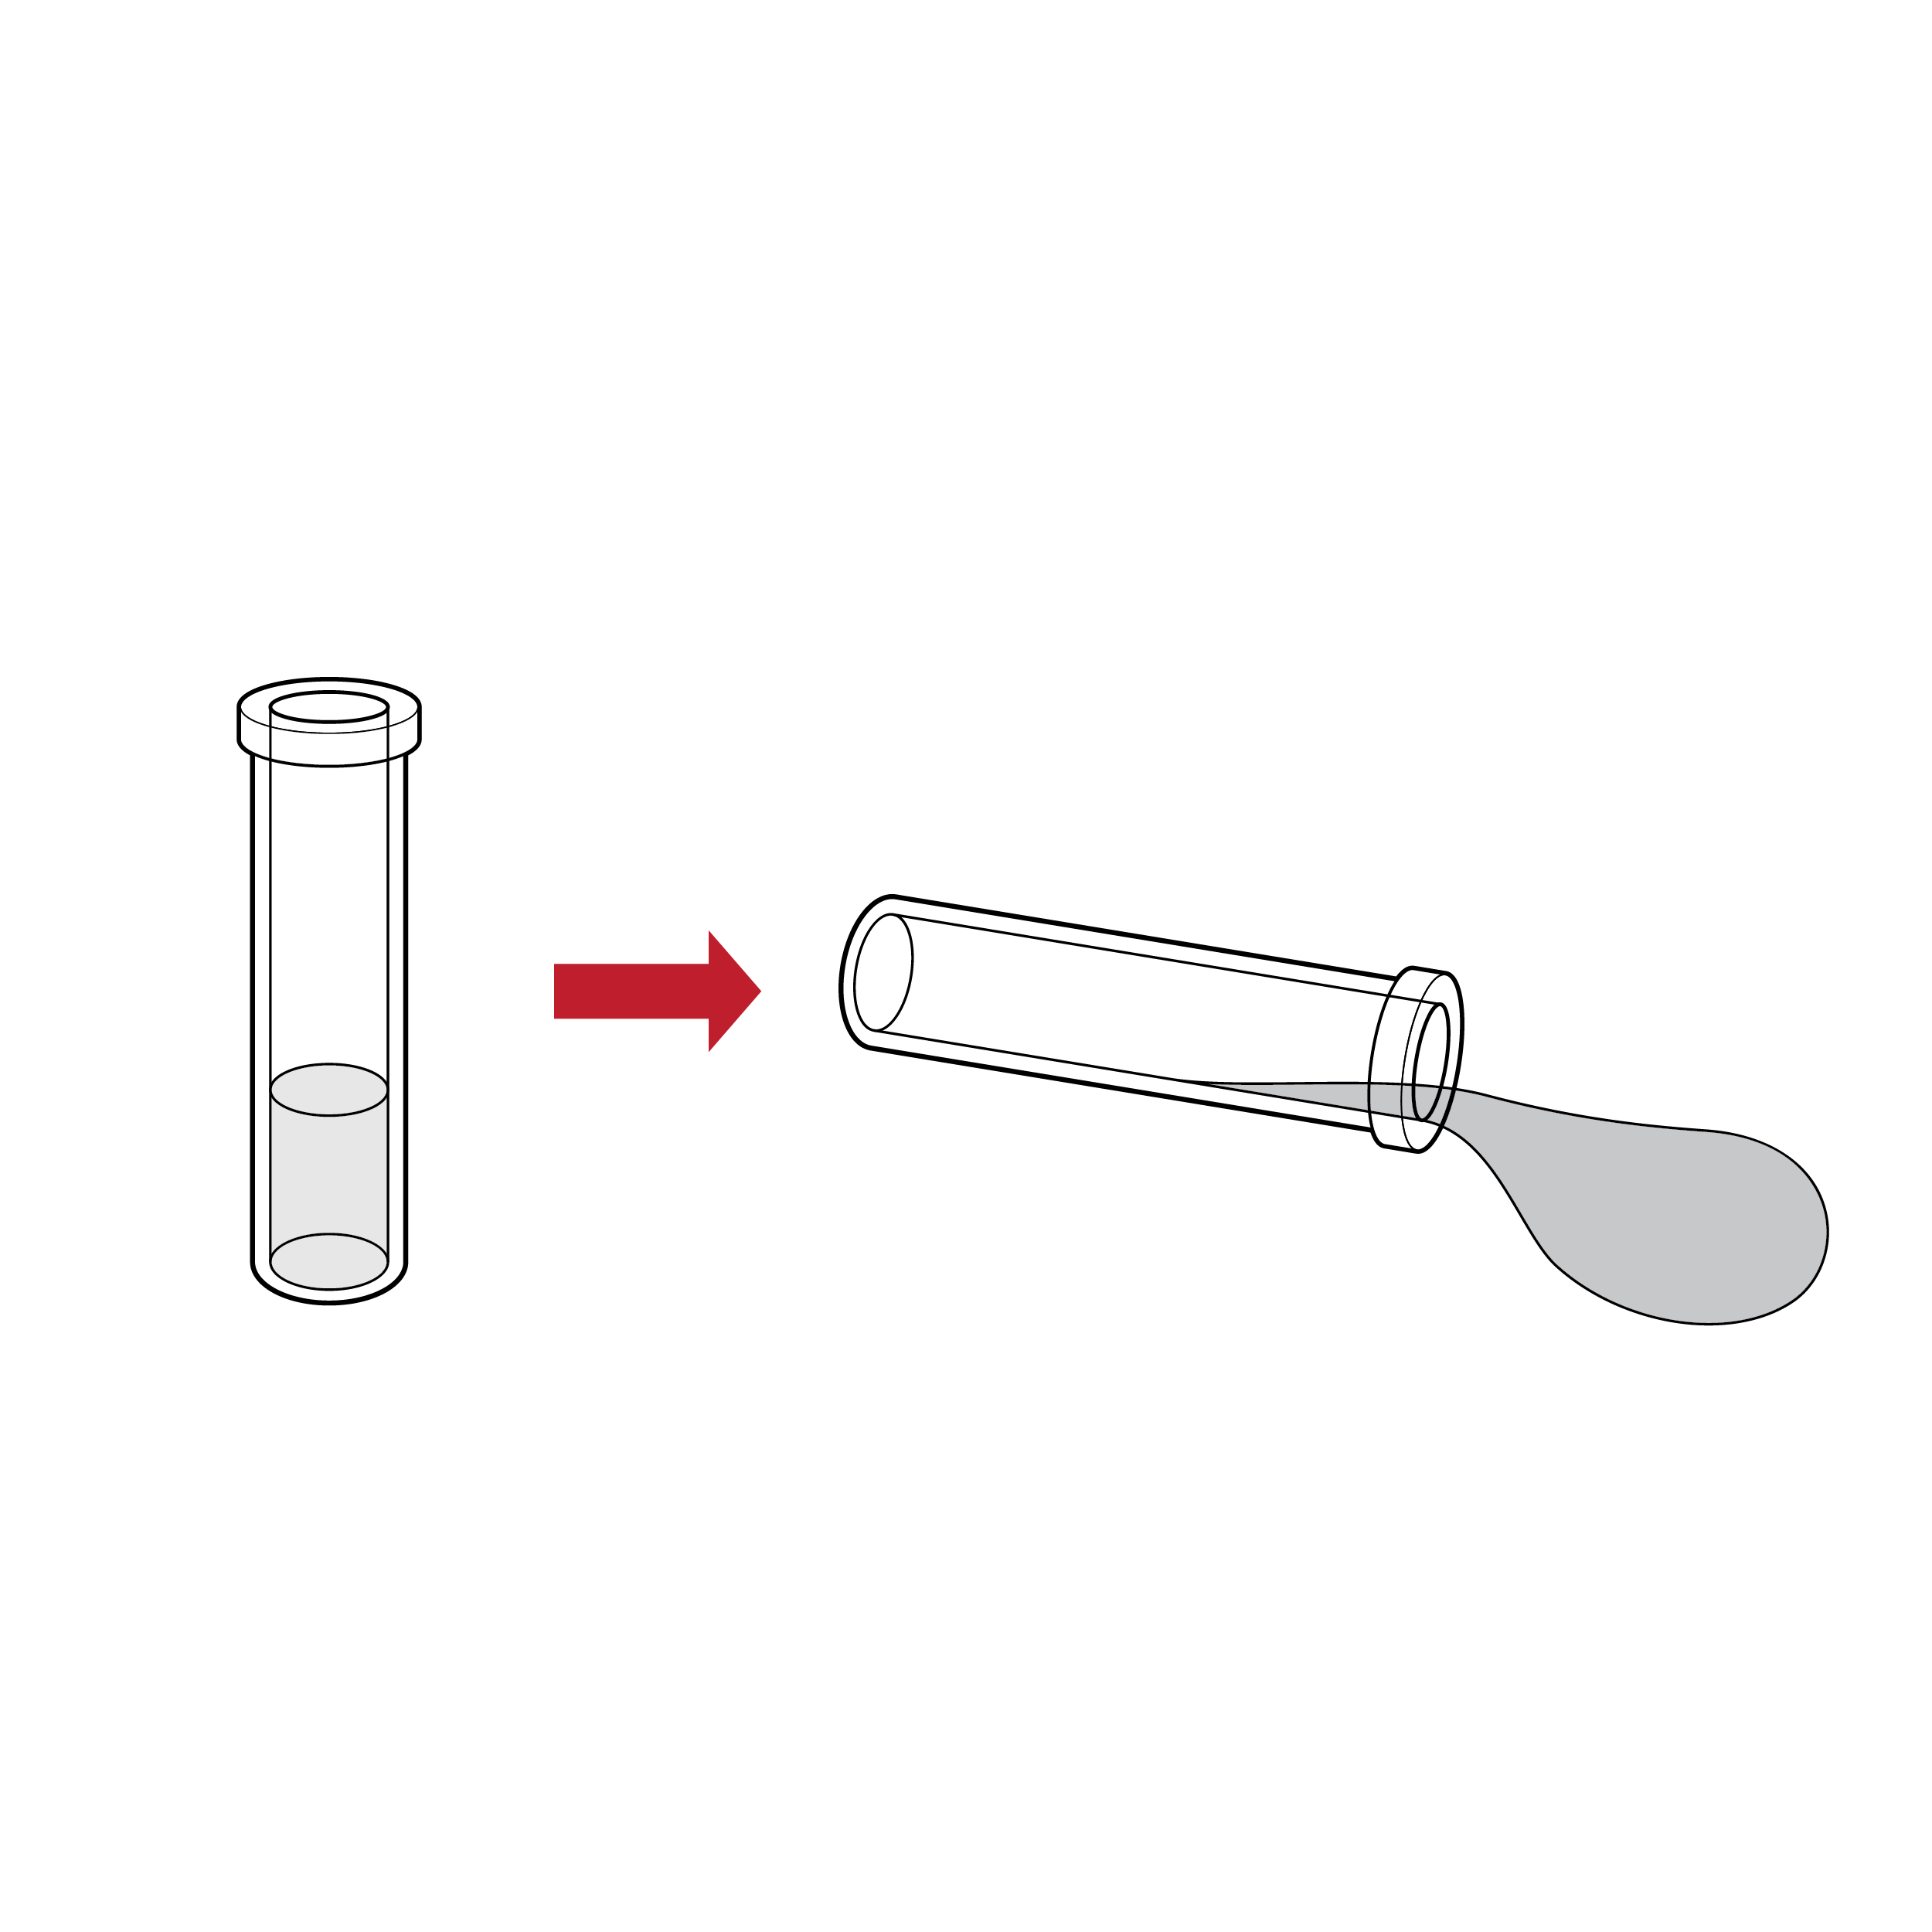 A cylindrical vial with fluid is shown upright with an arrow pointing to a second vial on its side with fluid pouring out, demonstrating the vial is easy to knock over.